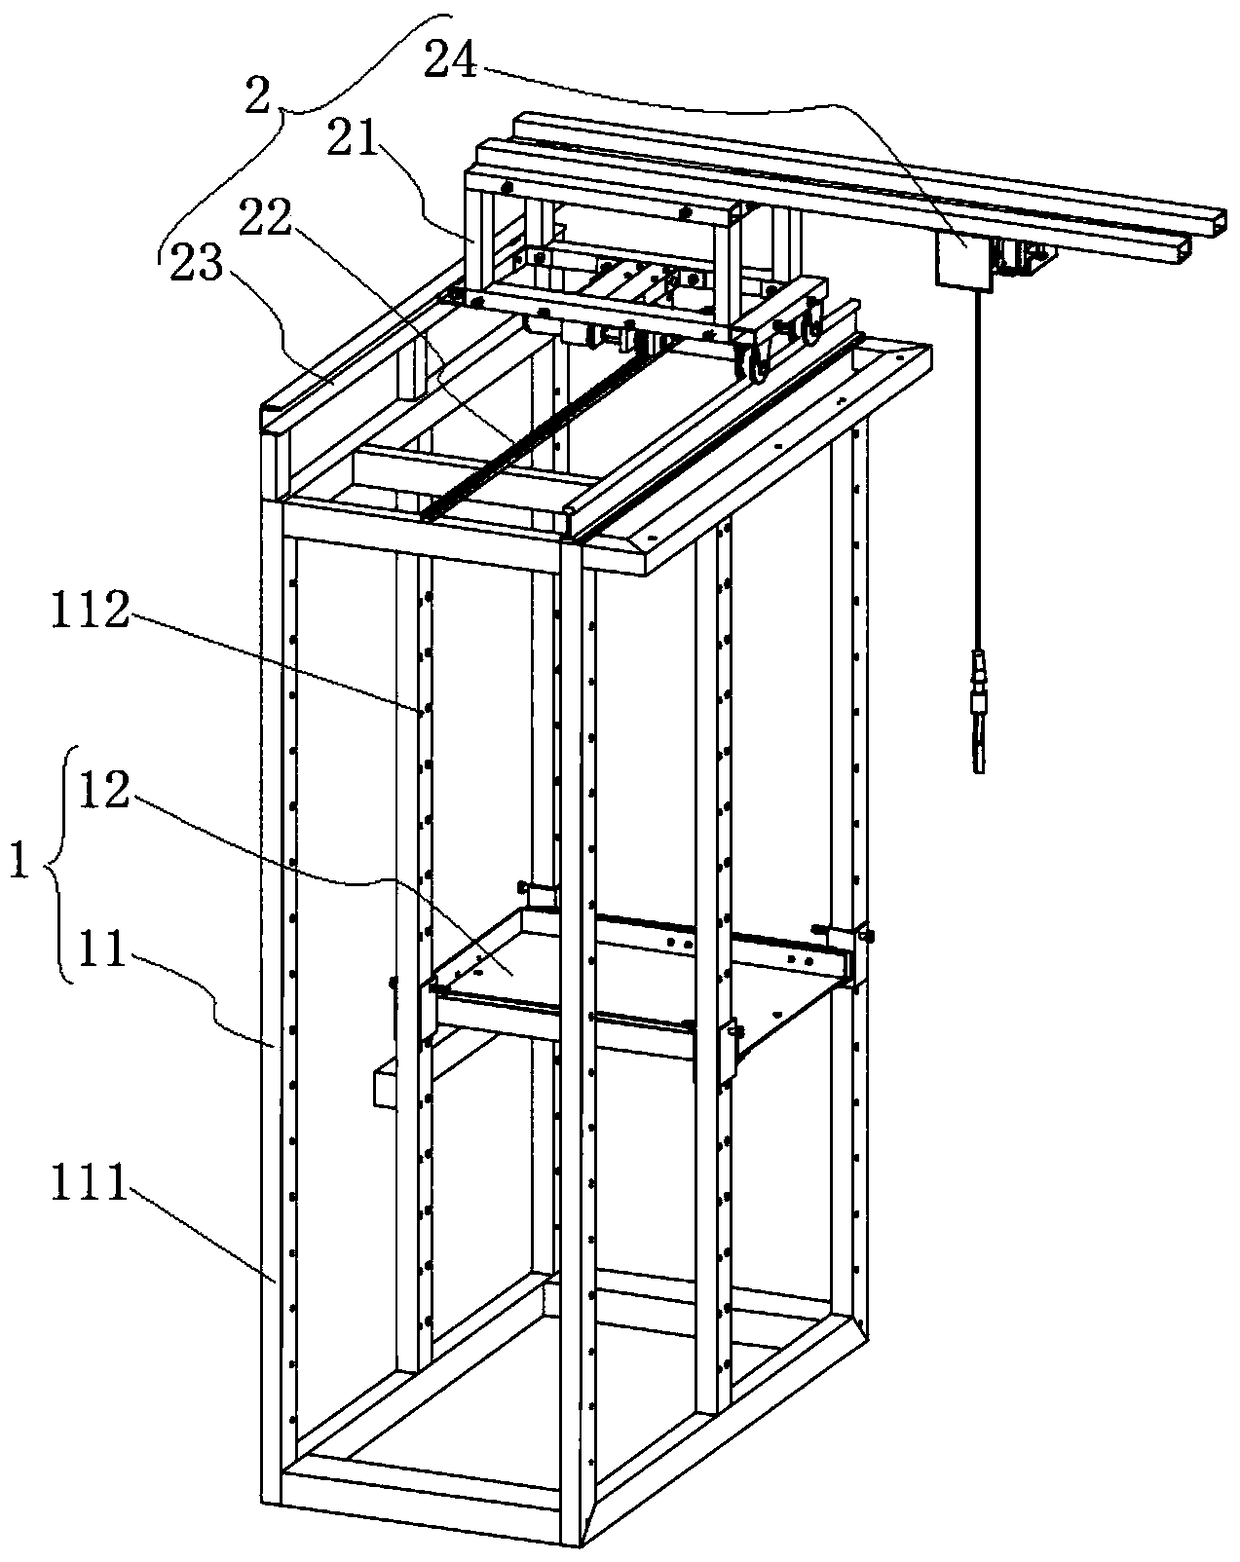 An electric control automatic loading and unloading shelf